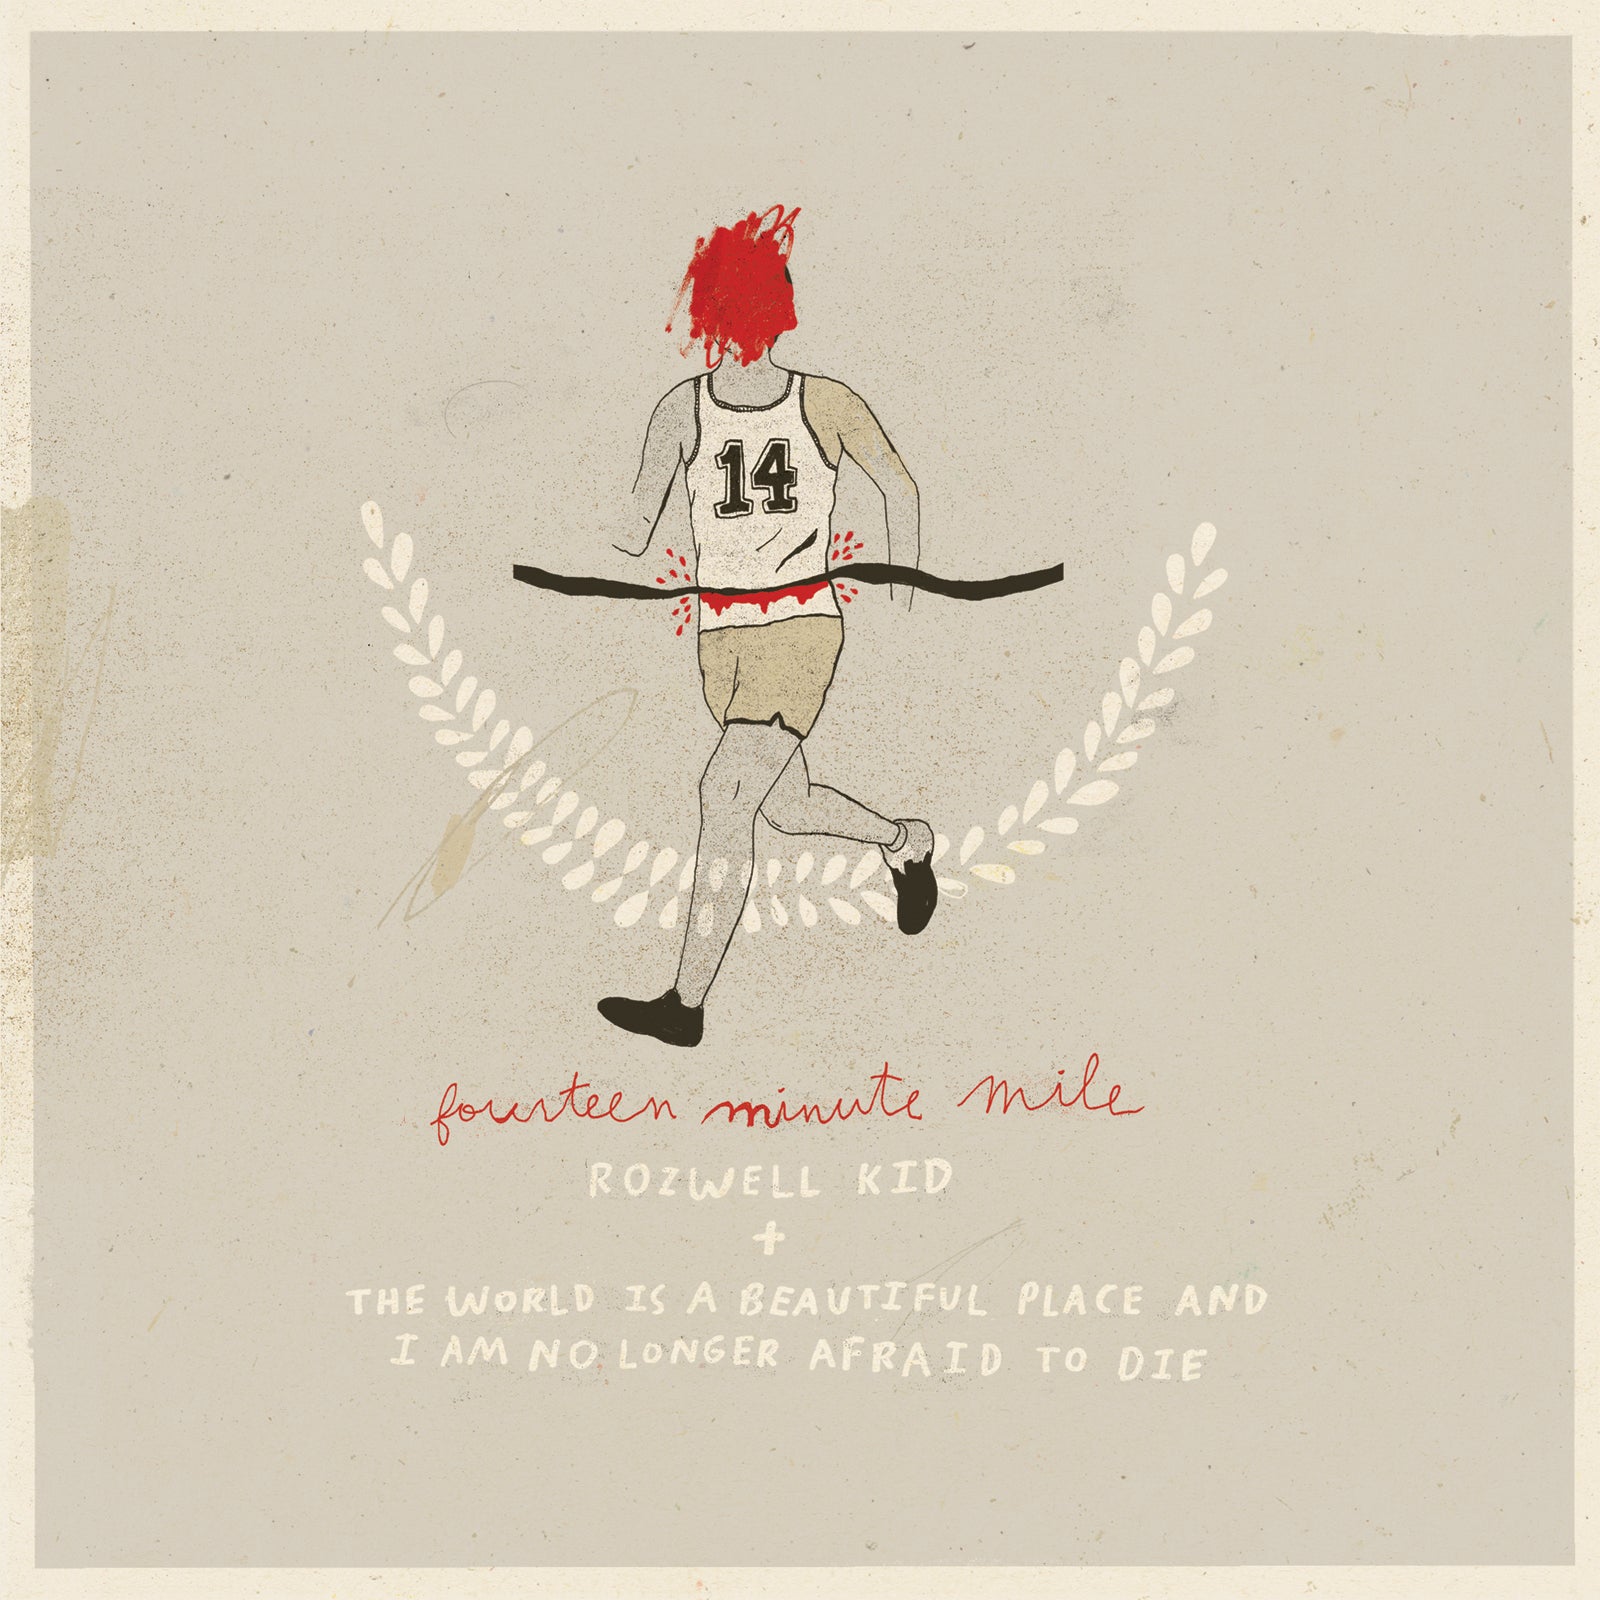 Rozwell Kid / The World Is A Beautiful Place And I Am No Longer Afraid To Die - Fourteen Minute Mile 7" - Vinyl - Broken World Media